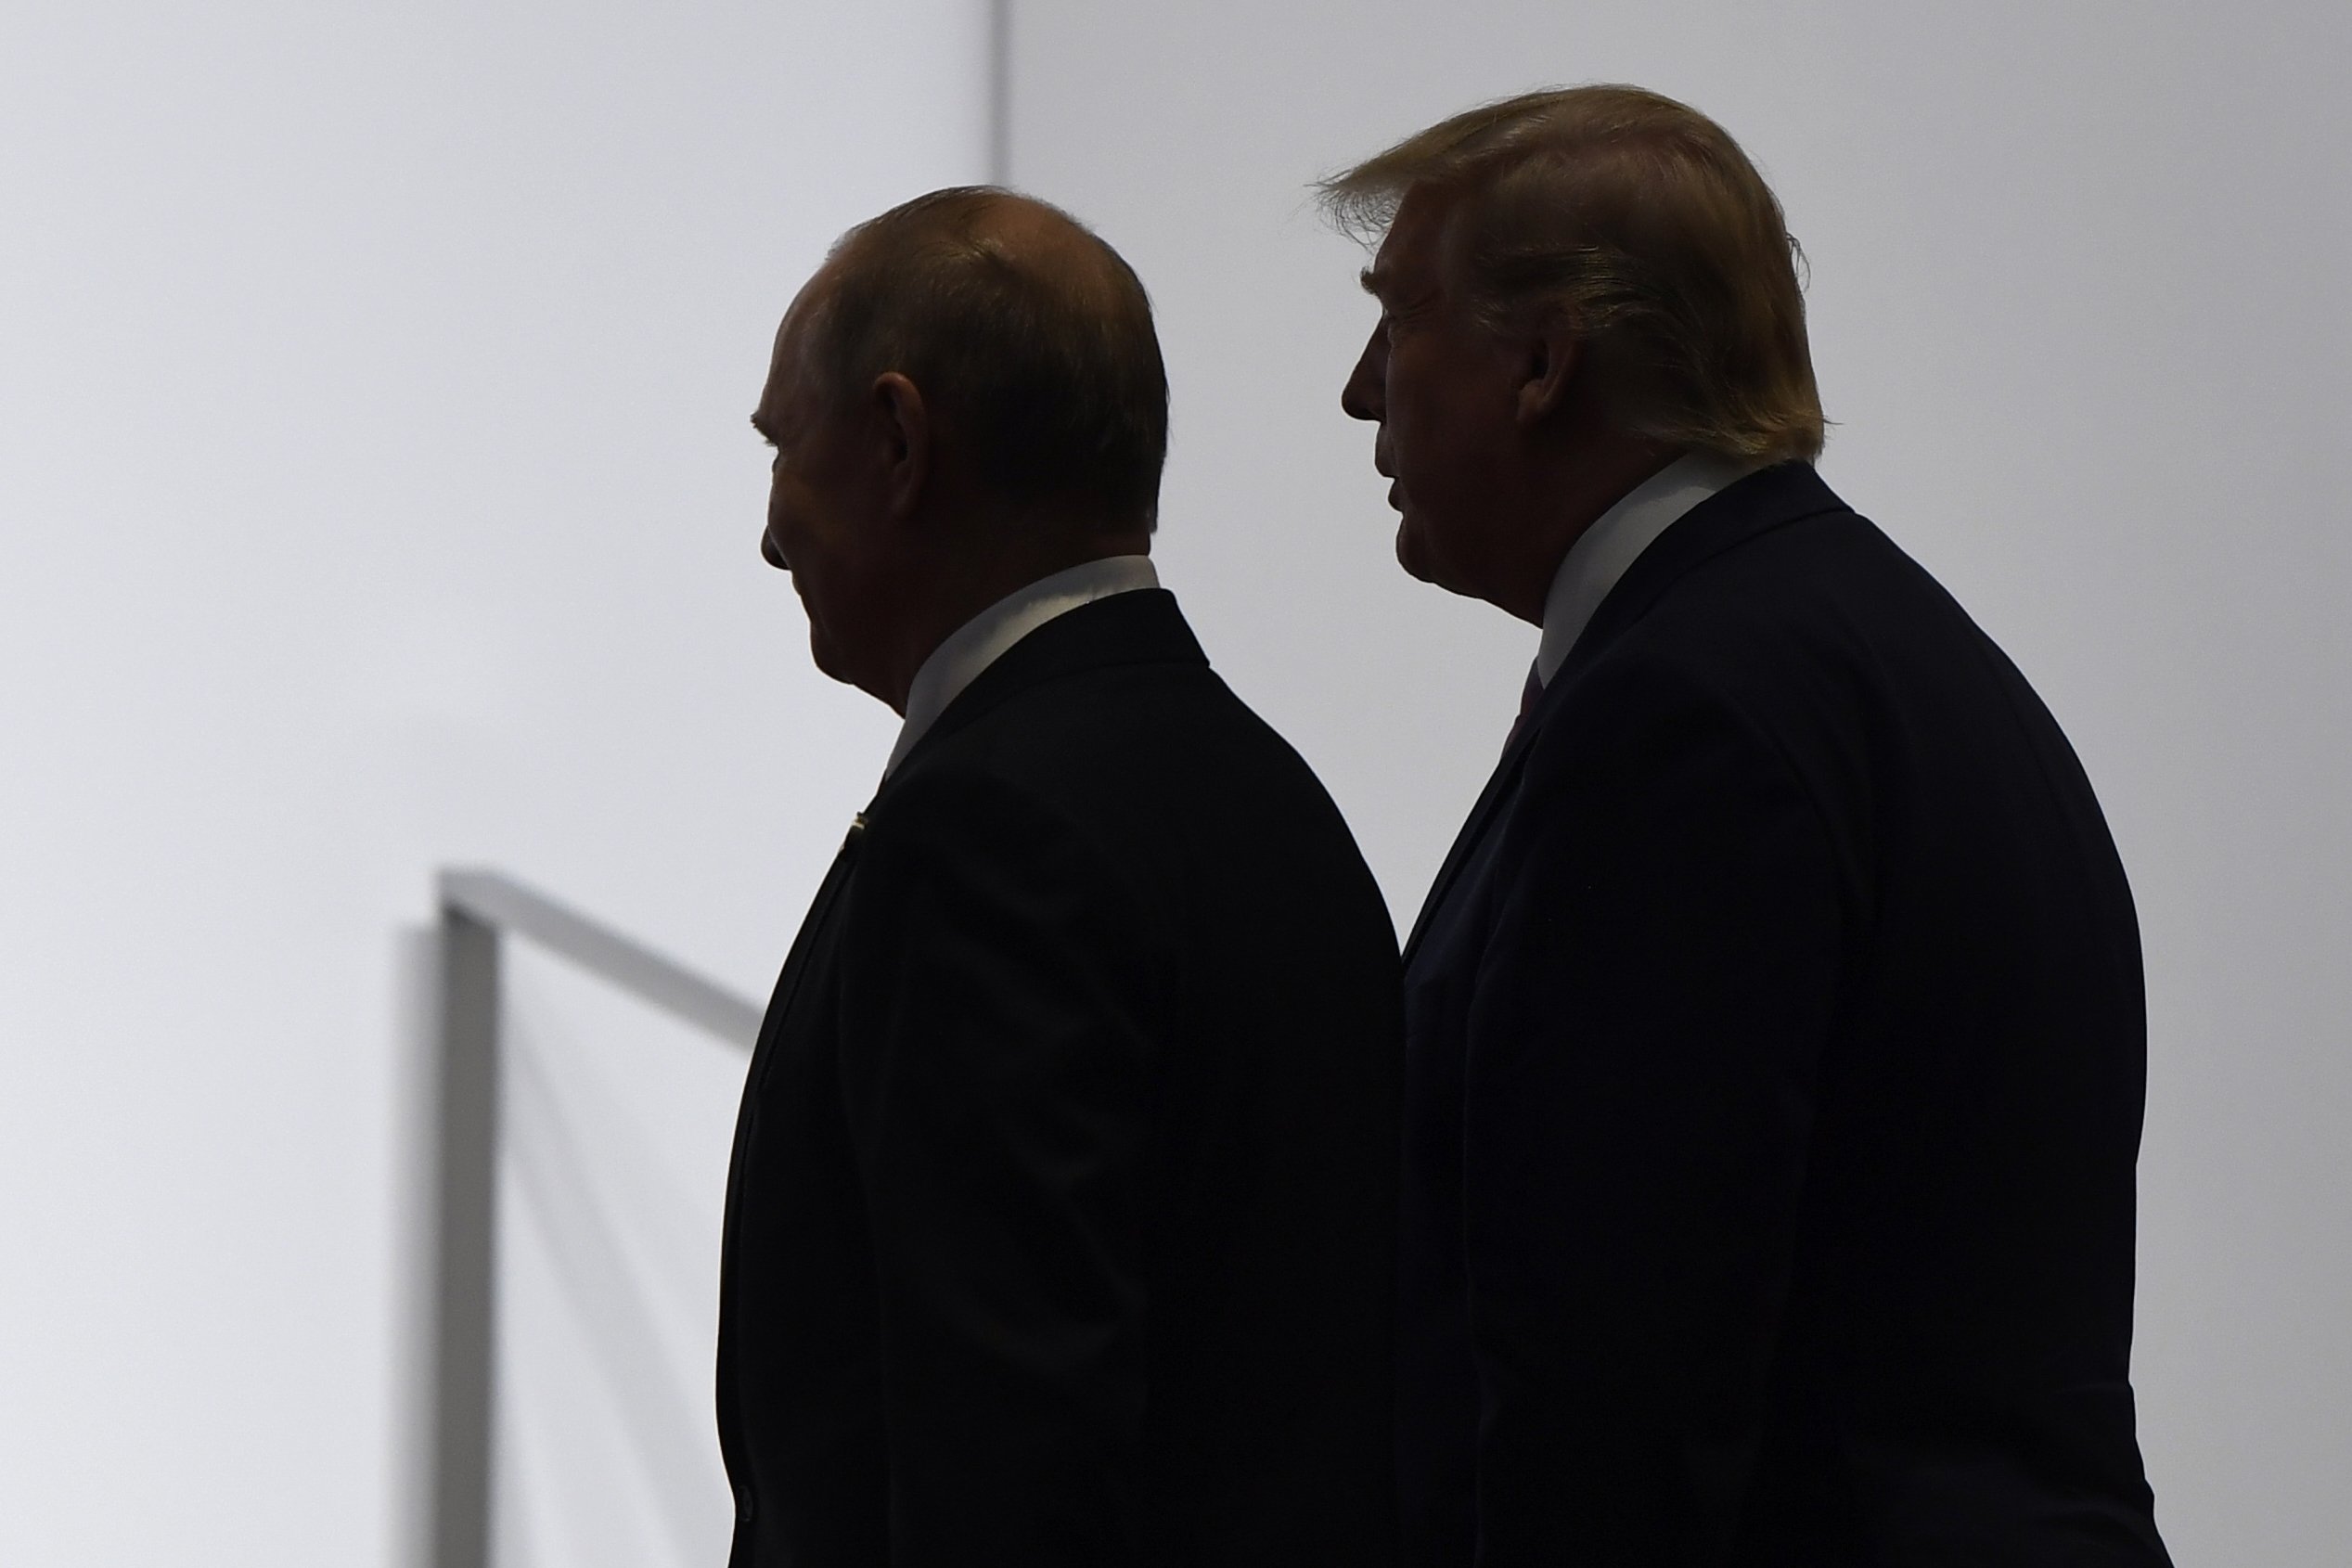 U.S. President Donald Trump and Russian President Vladimir Putin walk to participate in a group photo at the G-20 summit in Osaka, Japan, June 28, 2019. (AP Photo)